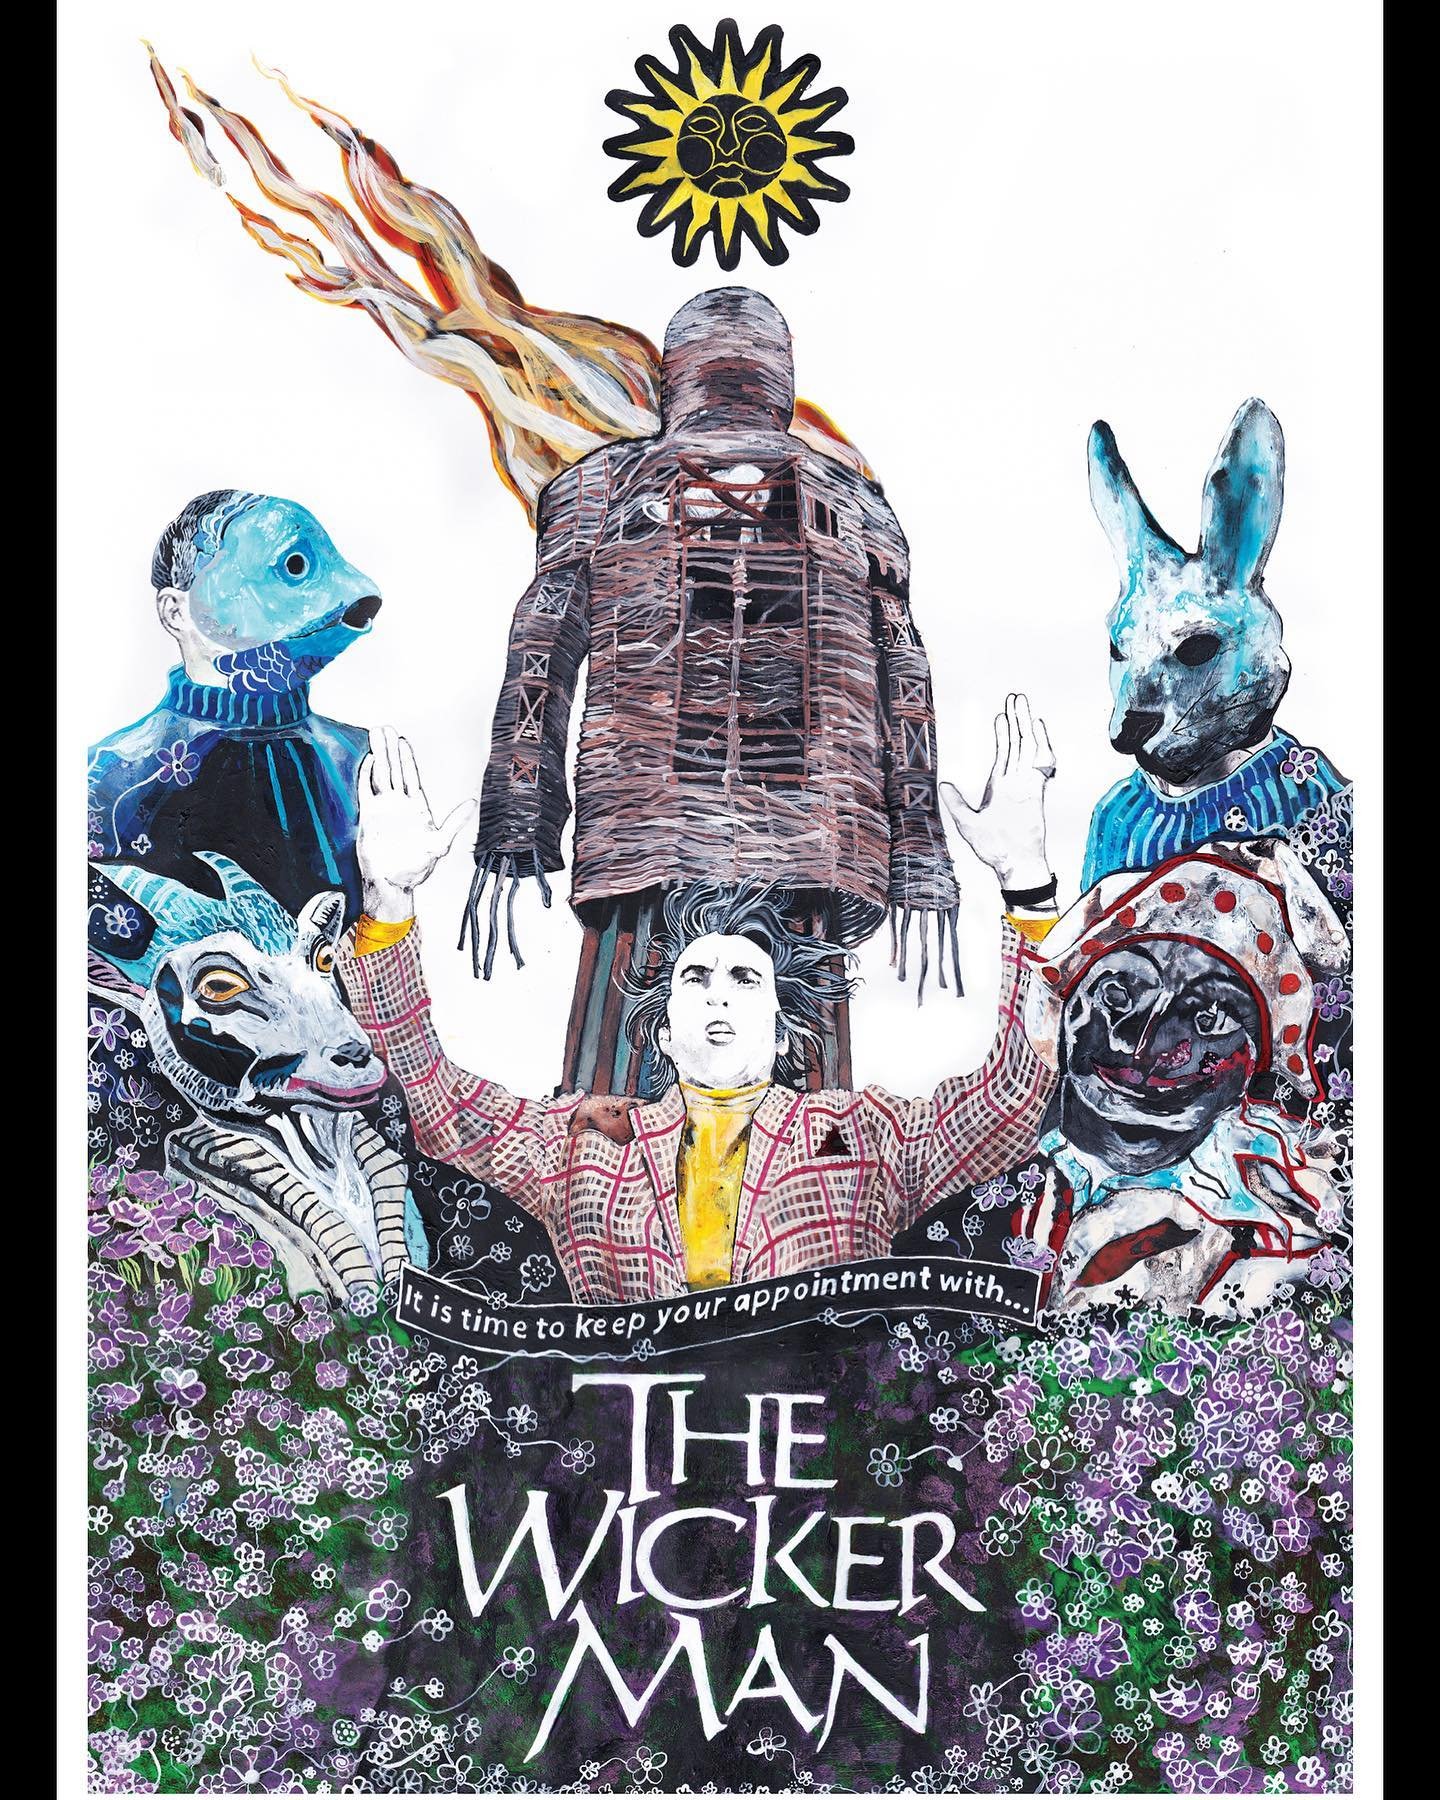 This is the 3rd alt poster I ever painted around 4 years back. I&rsquo;ve now finished my second poster for The Wicker Man, it&rsquo;s been so much fun to revisit. Prints of the new painting will be available from 12pm tomorrow (UK time). A limited r